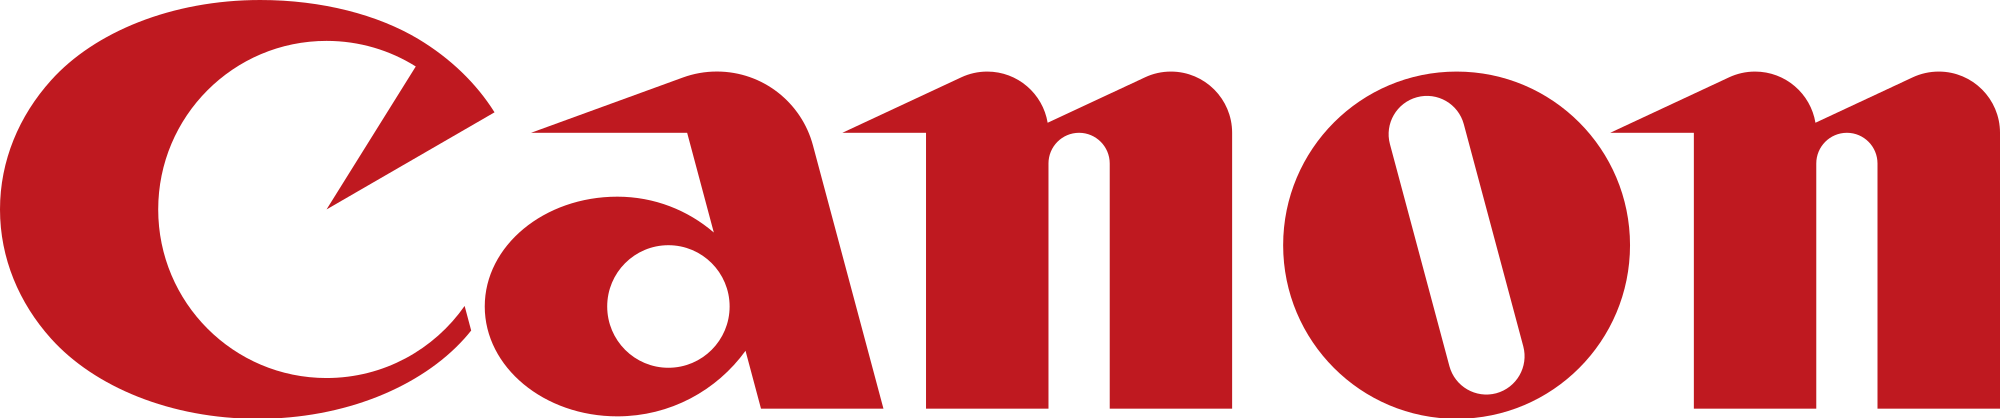 Canon_wordmark.svg.png